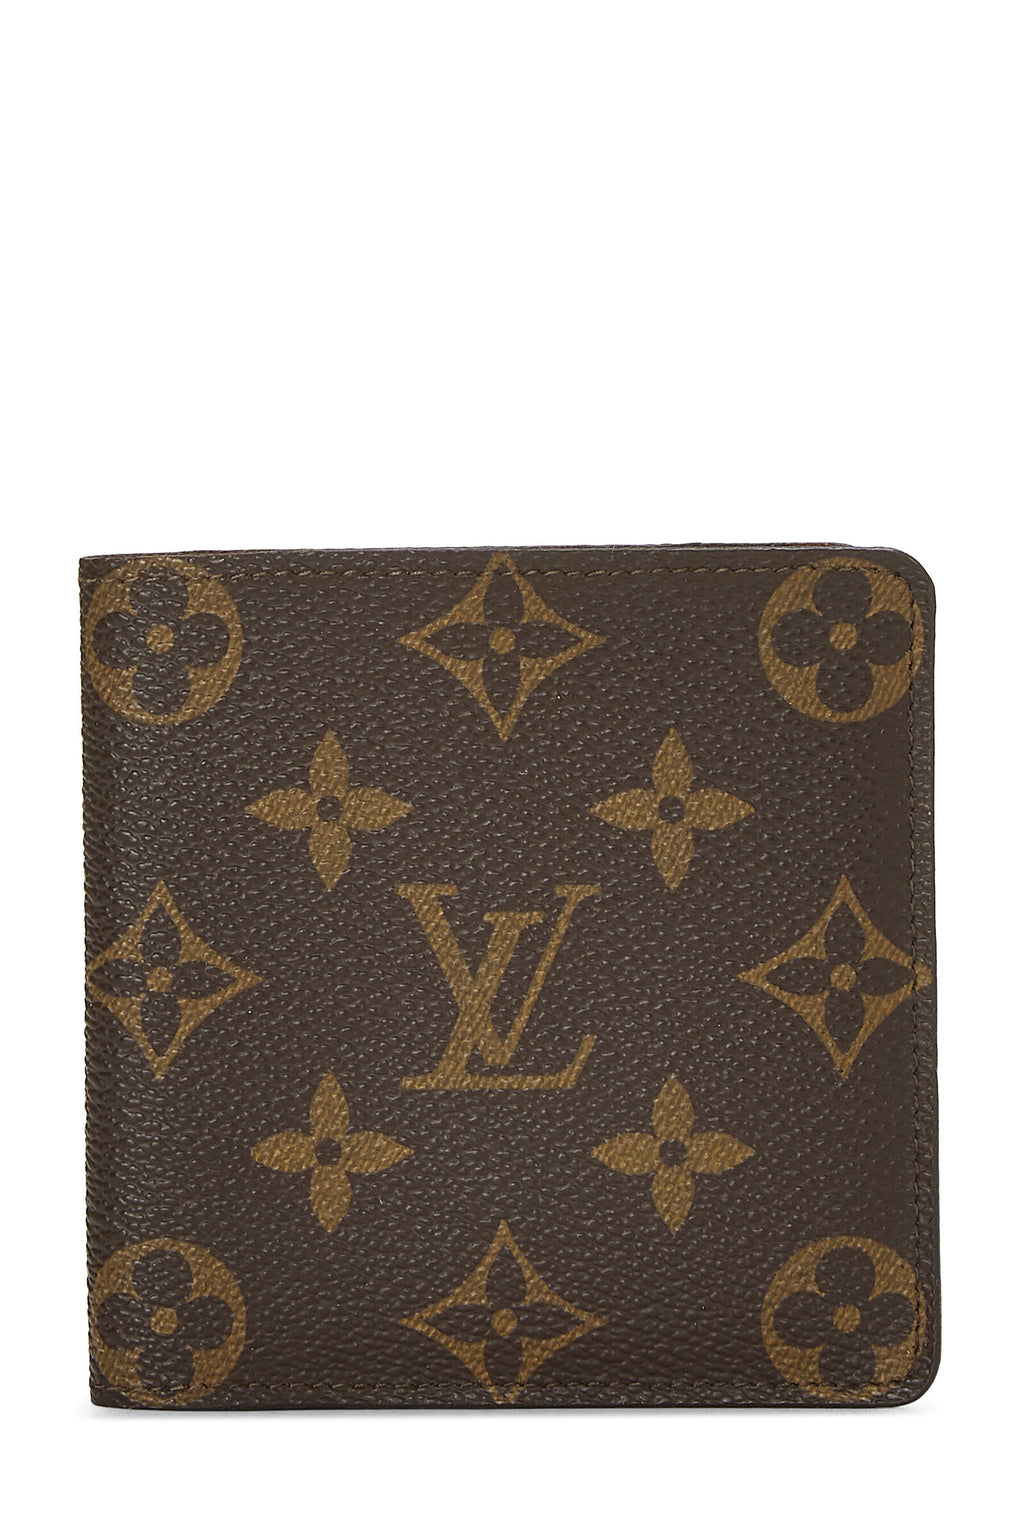 Preloved, Preowned, and Used Louis Vuitton what you need to know